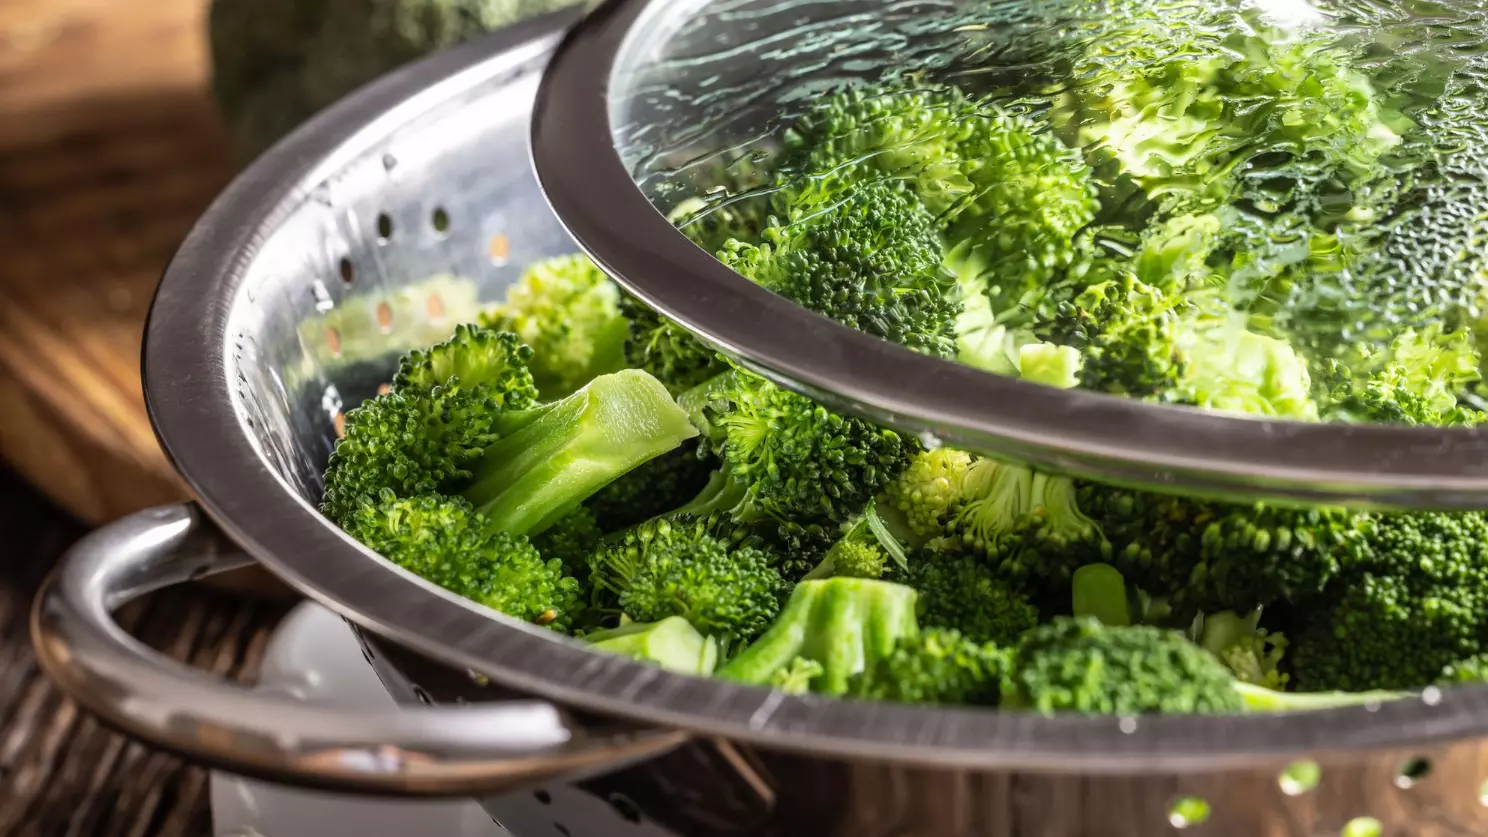 How to cook broccoli in a steamer